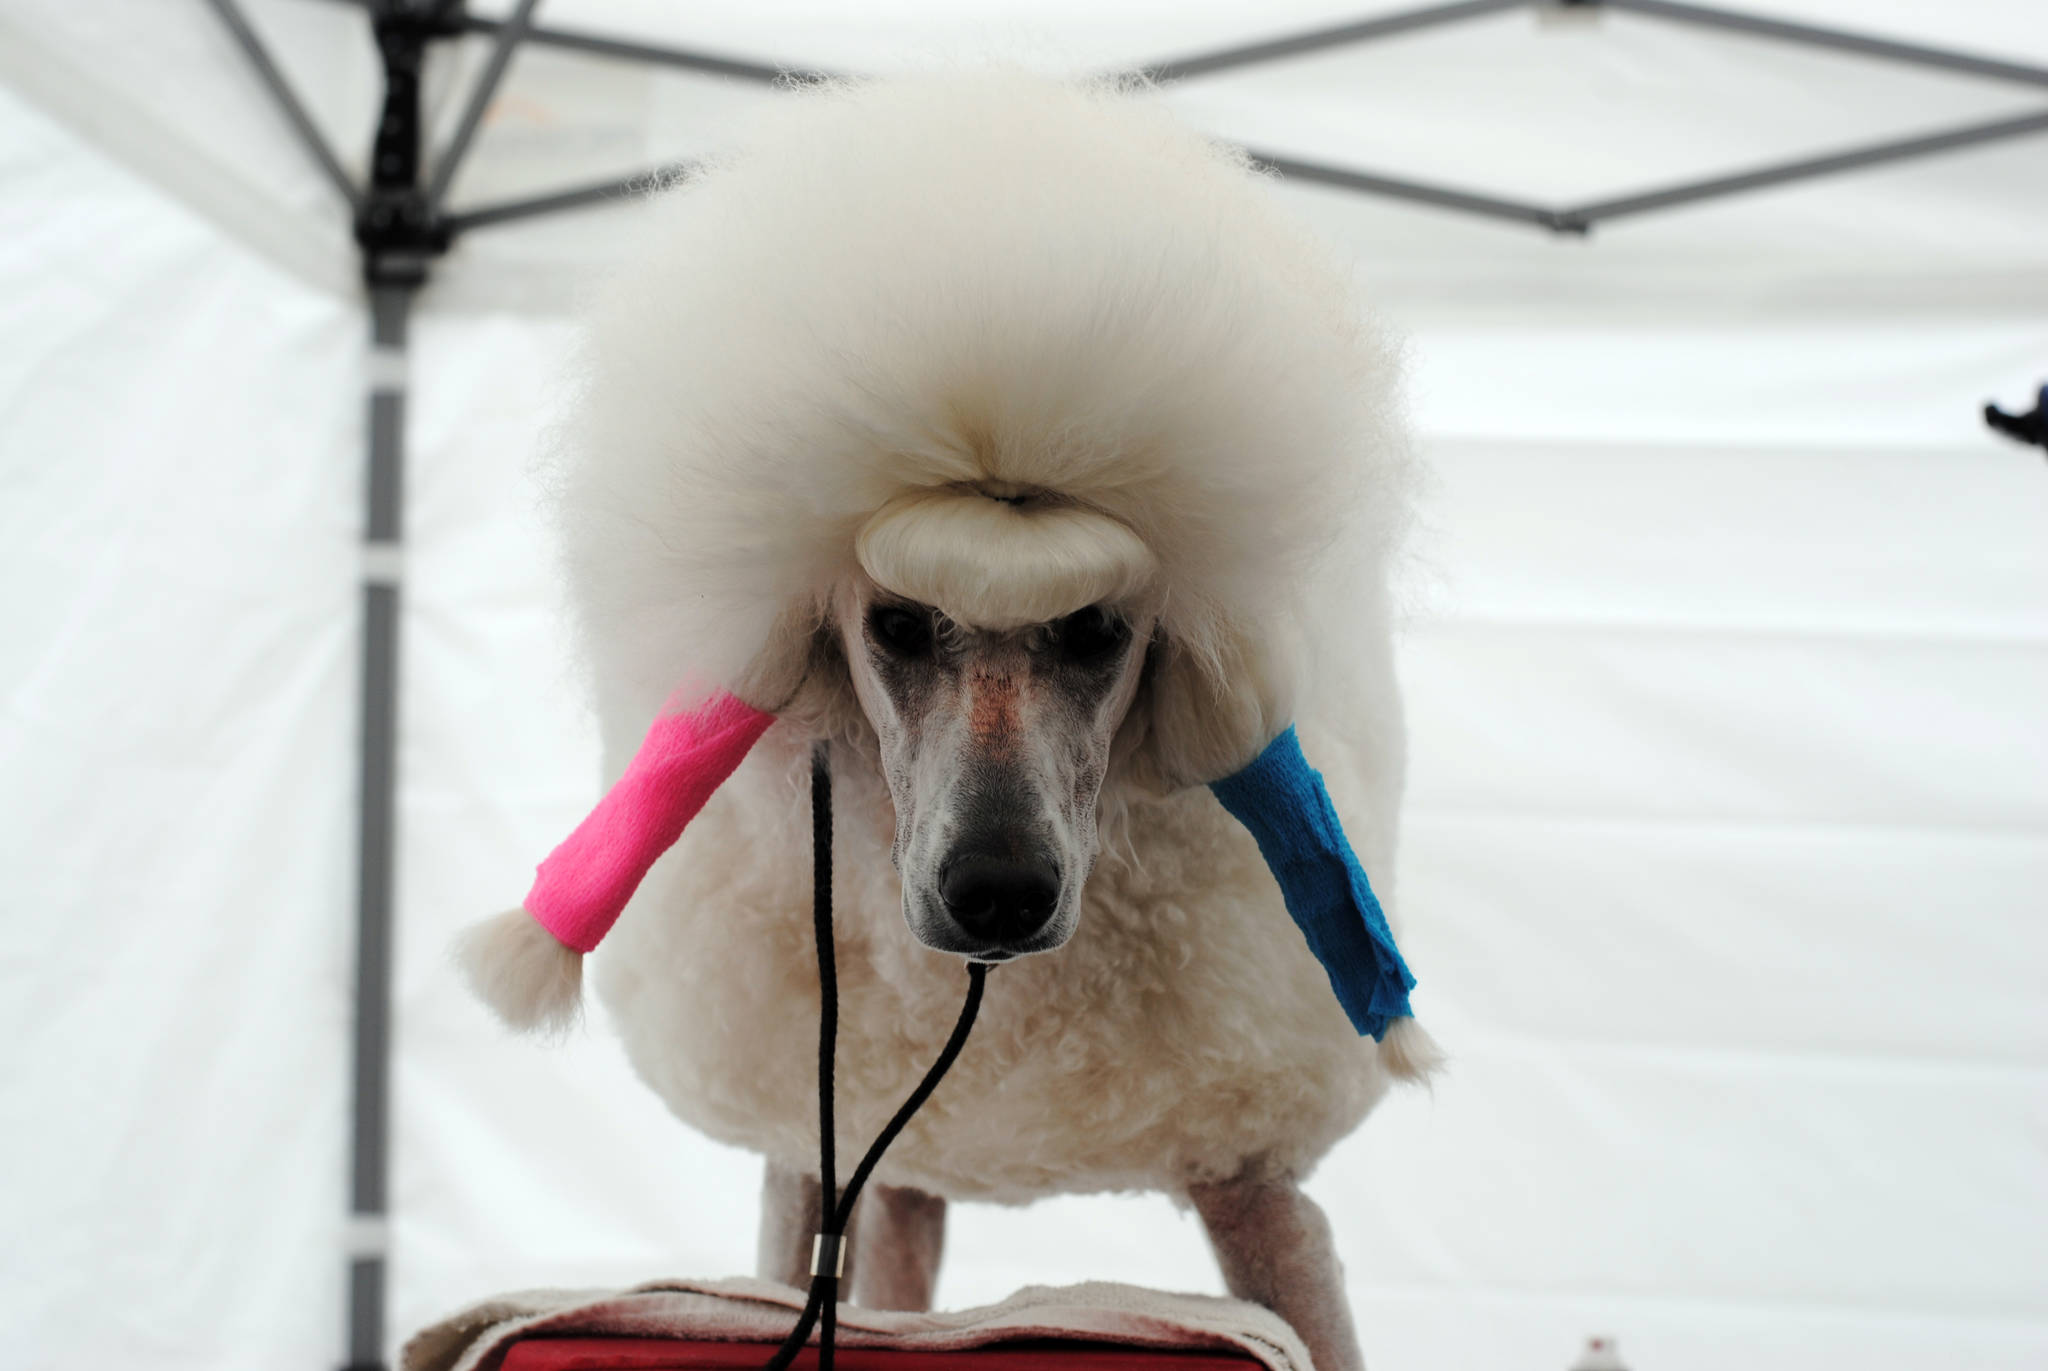 NaPali the poodle gets groomed in preparation for the Kenai Kennel Club dog show Saturday, July 15, 2017 at Skyview Middle School in Soldotna, Alaska. NaPali donned the continental cut to show off the regal quality of the poodle, according to owner Melissa Laggis of Palmer. (Photo by Kat Sorensen/Peninsula Clarion)